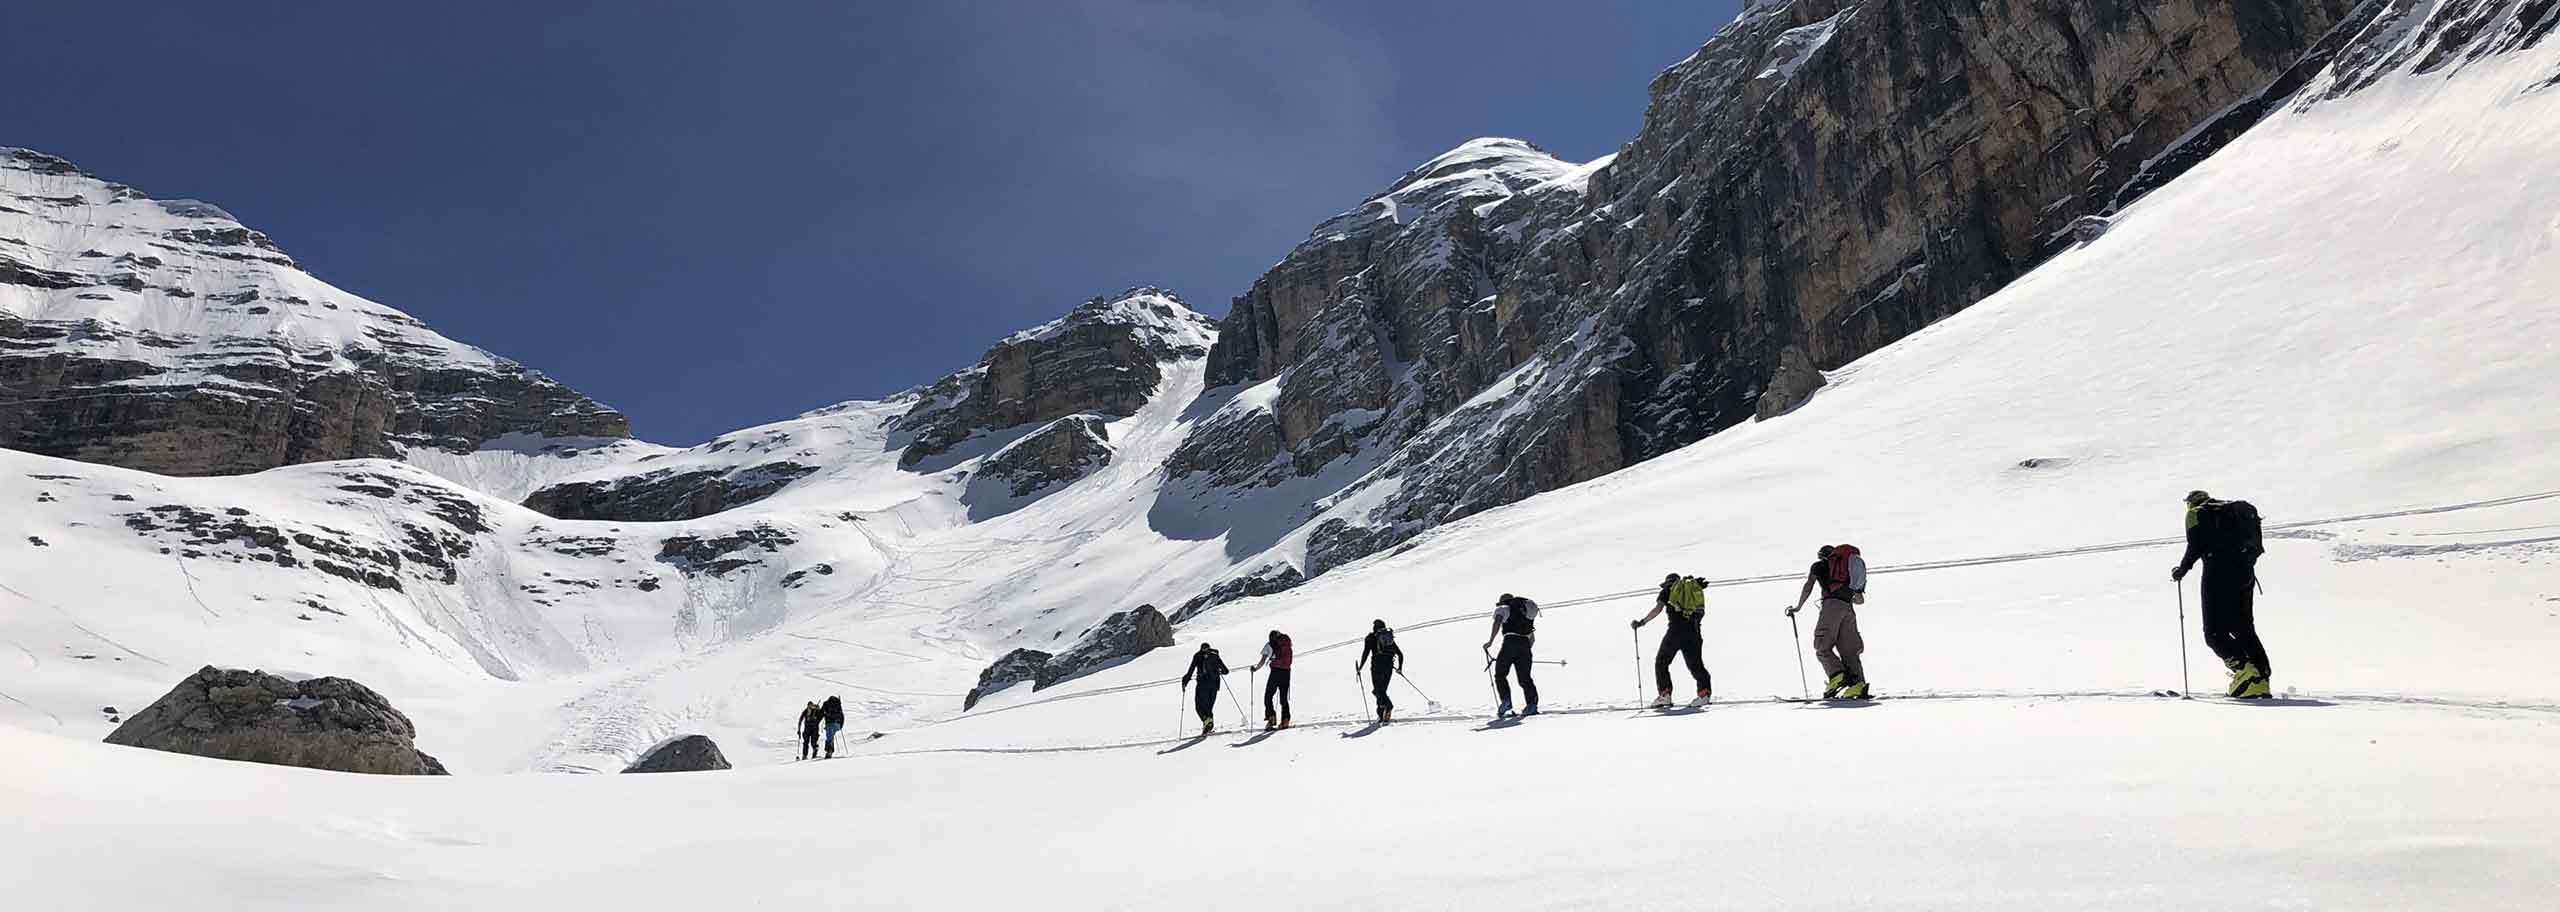 Val di Fassa Ski Touring Experiences, Trips and Courses